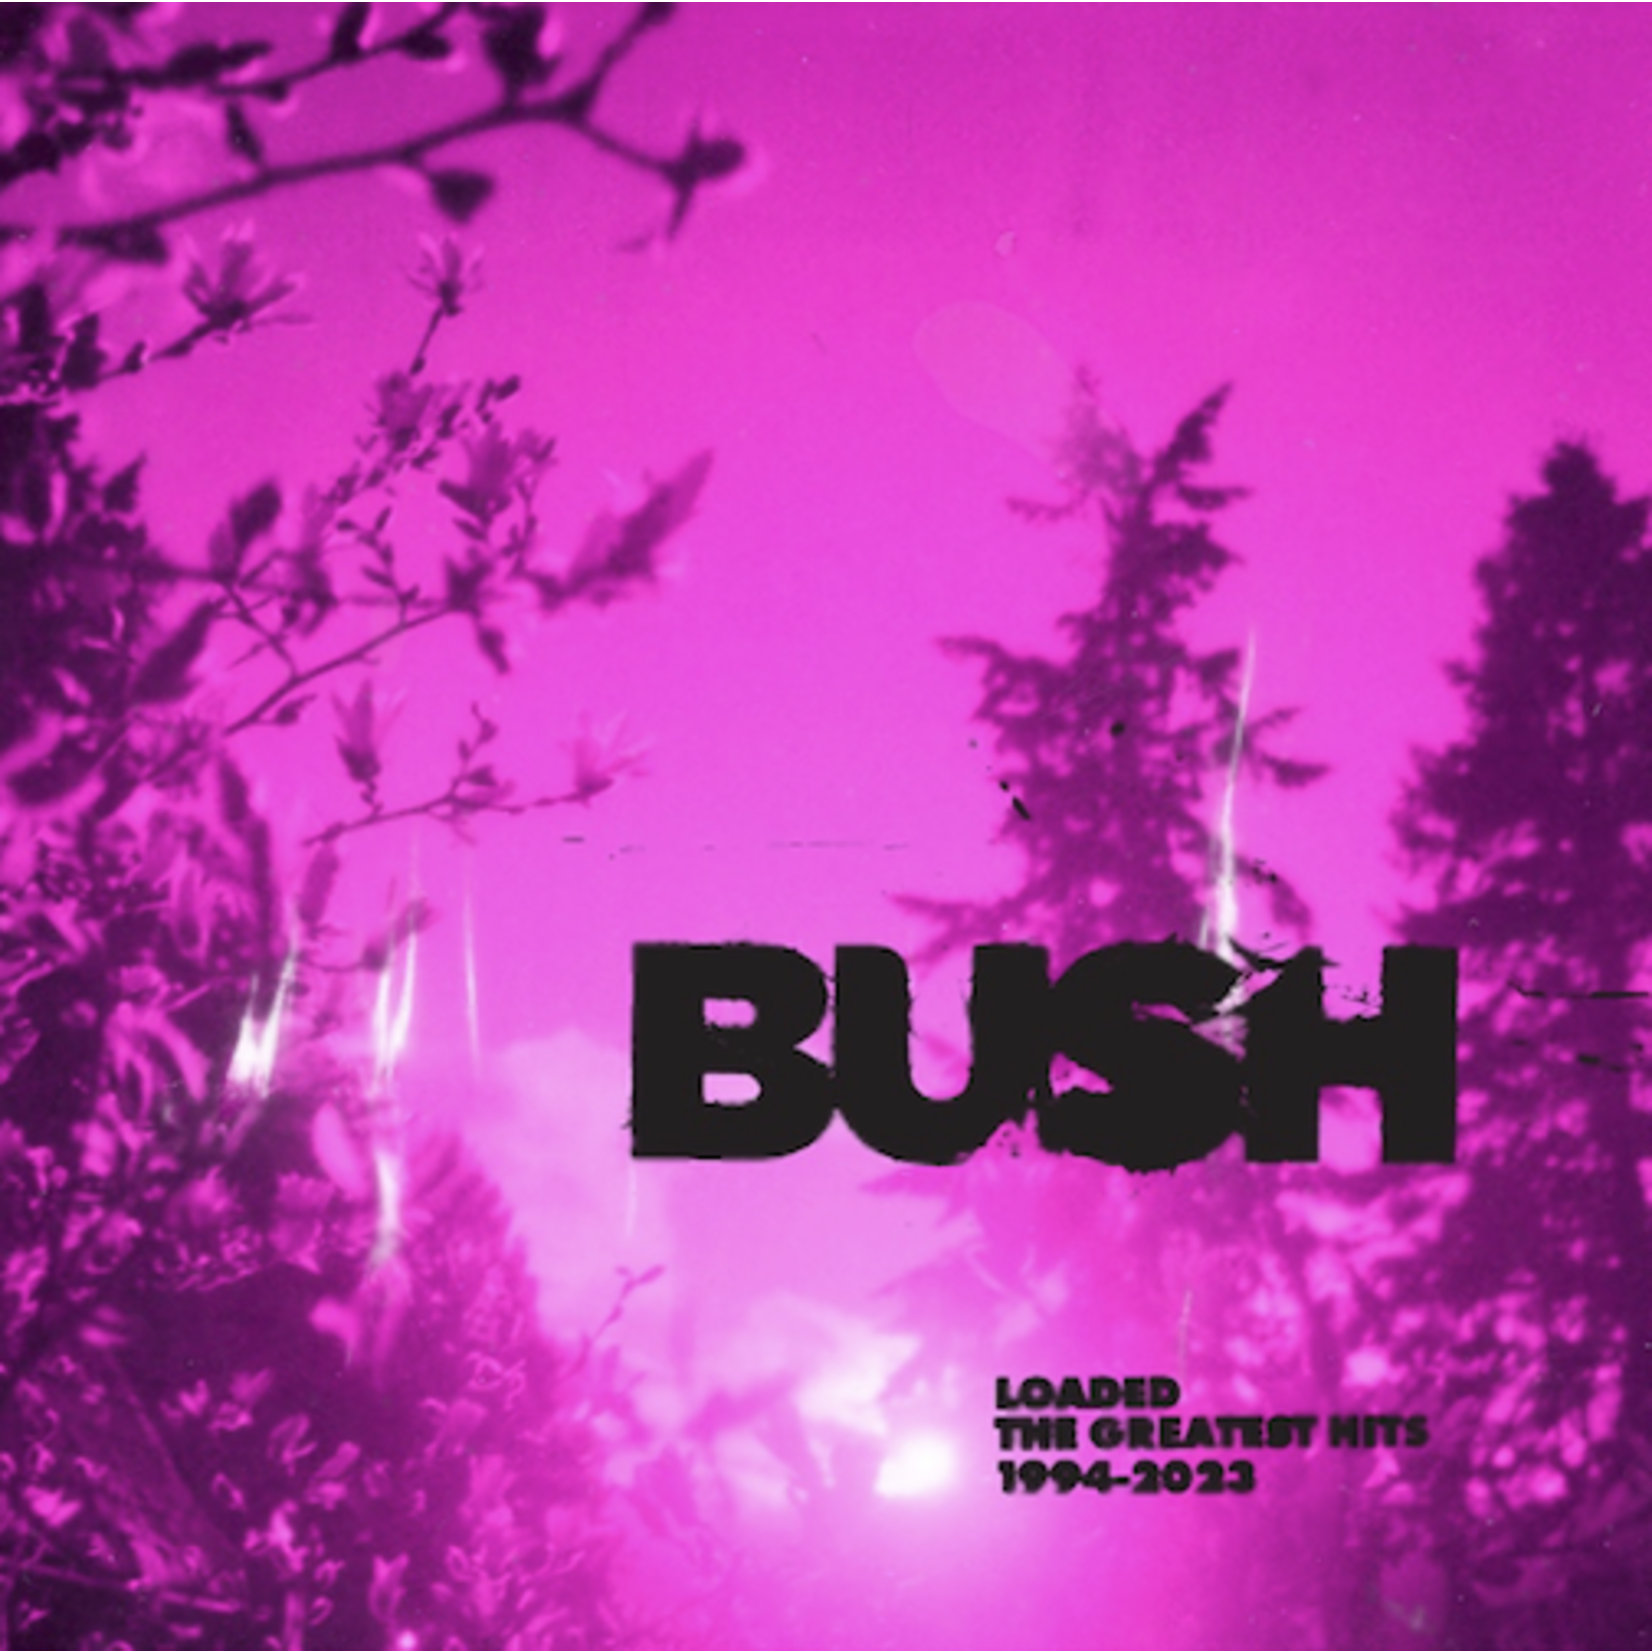 [New] Bush - Loaded - The Greatest Hits 1994-2023 (2LP, cloudy clear vinyl)